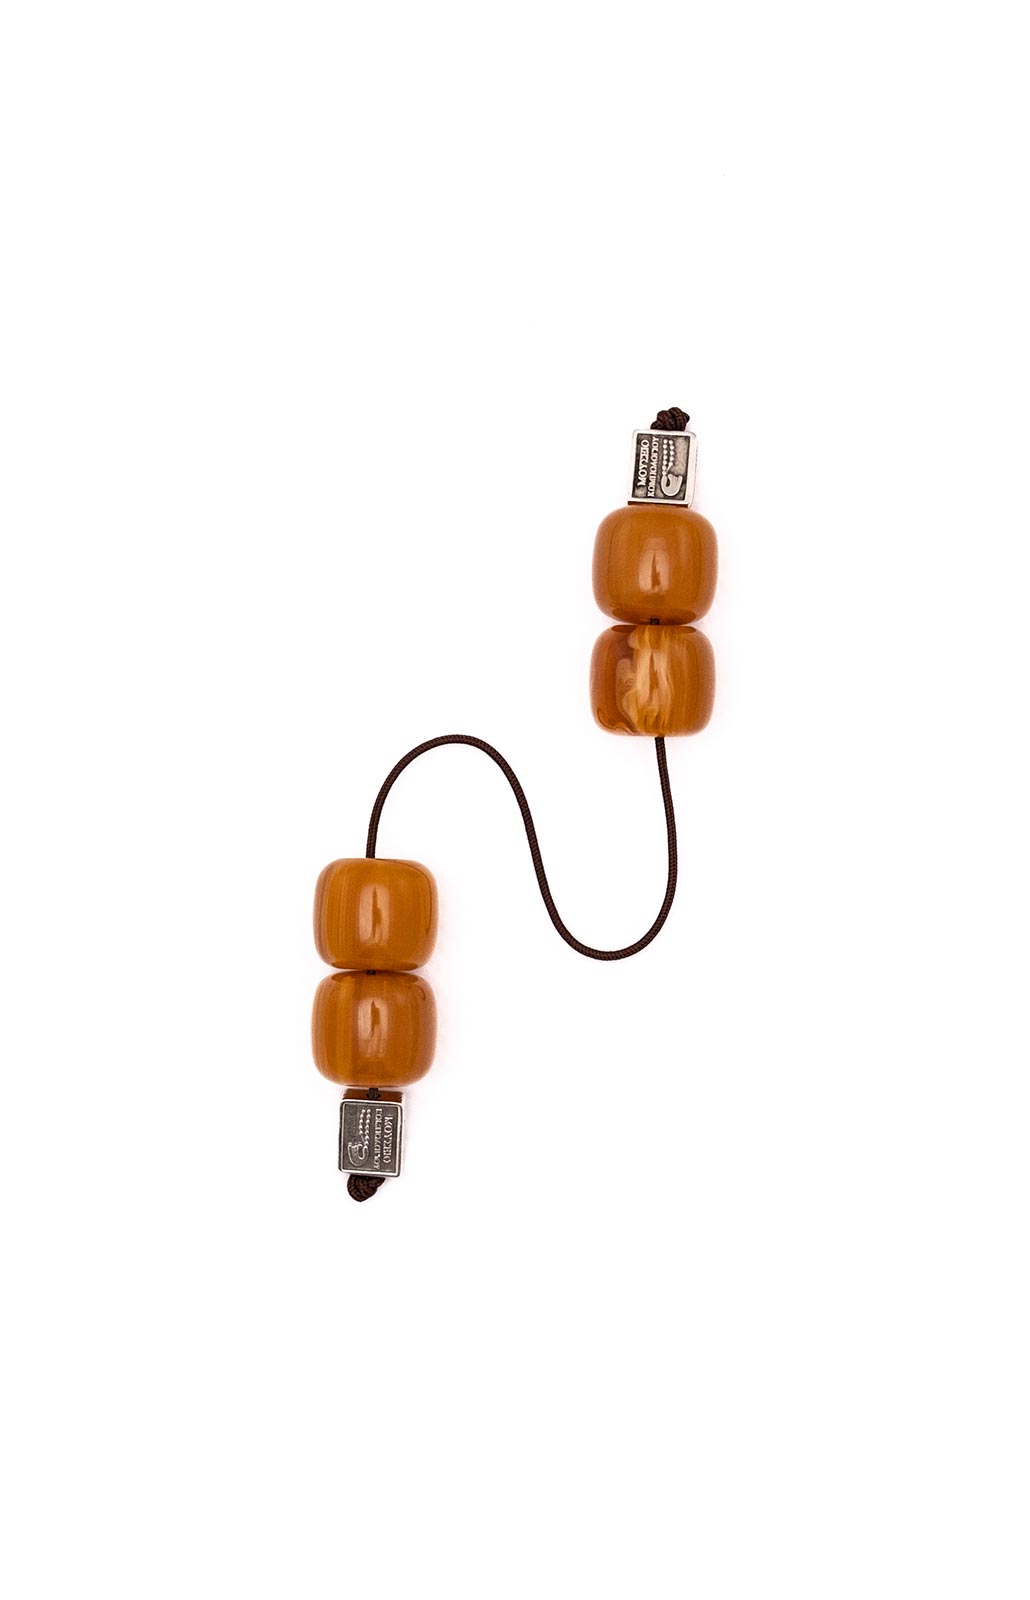 Begleri made of artificial resin (orange-brown with water-like shades)